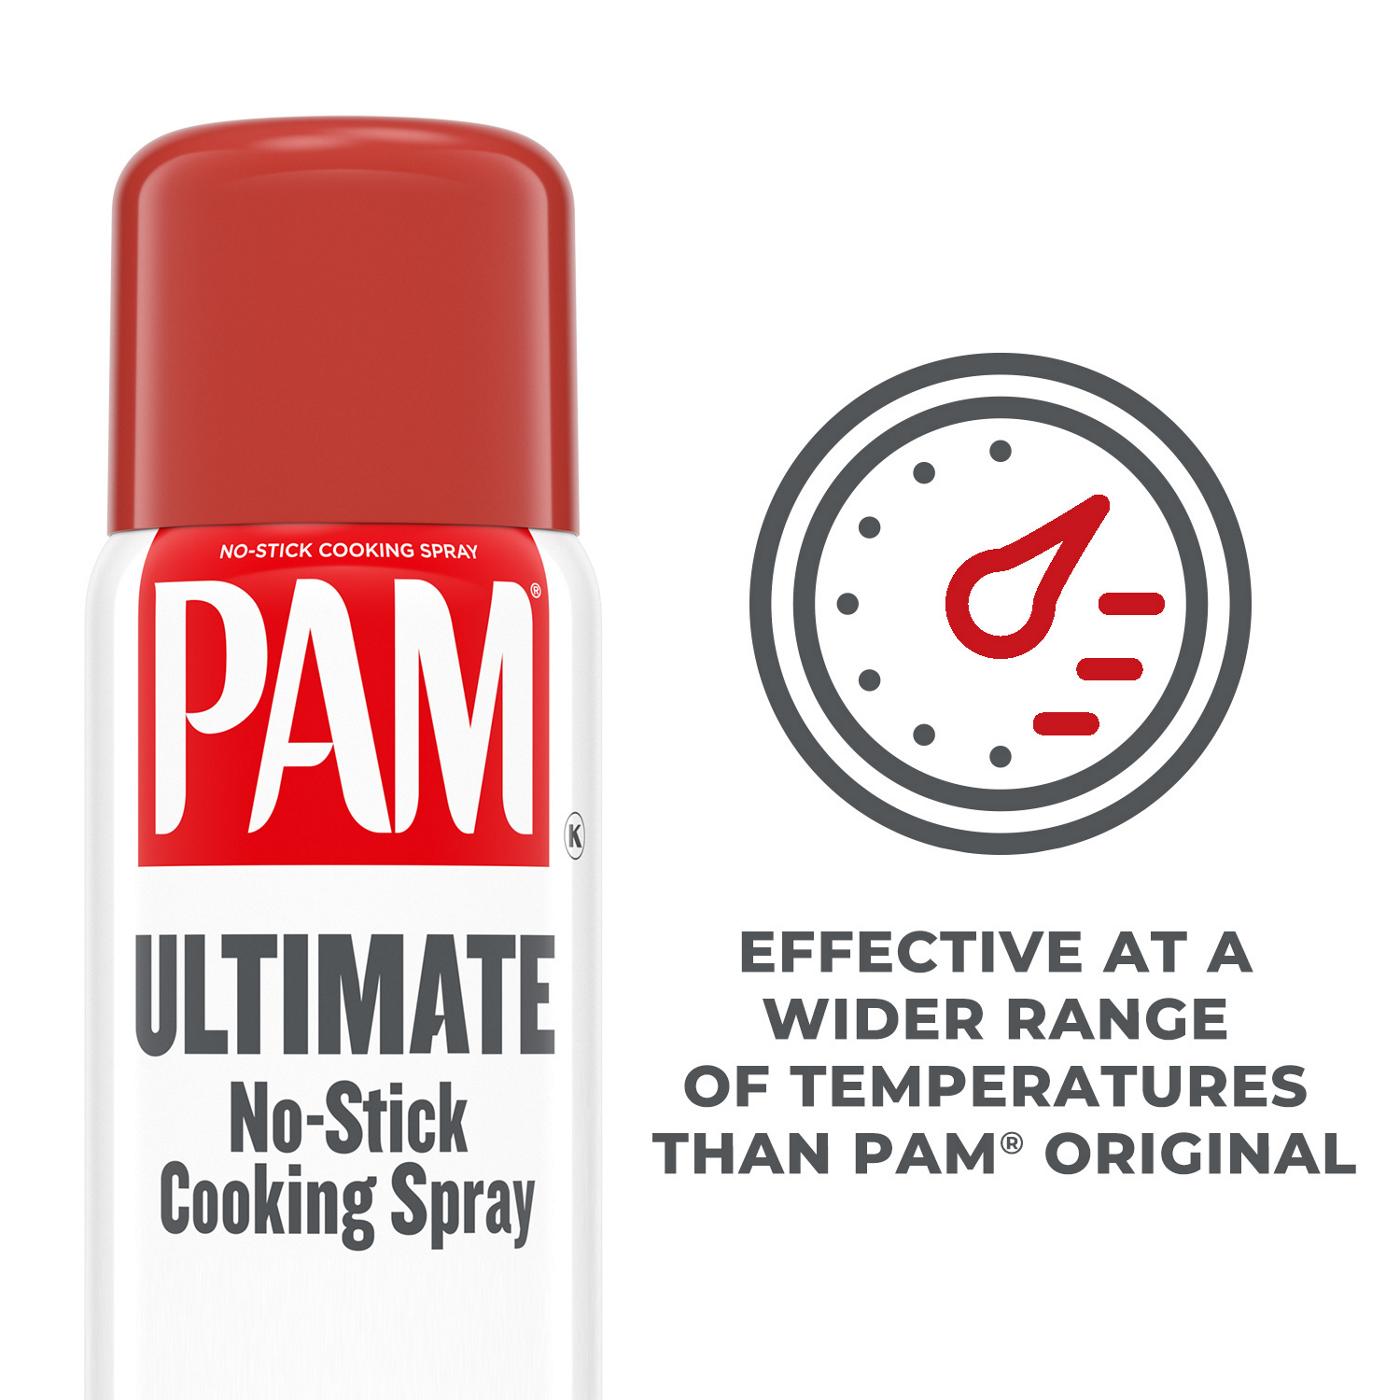 PAM Ultimate No-Stick Cooking Spray; image 6 of 7